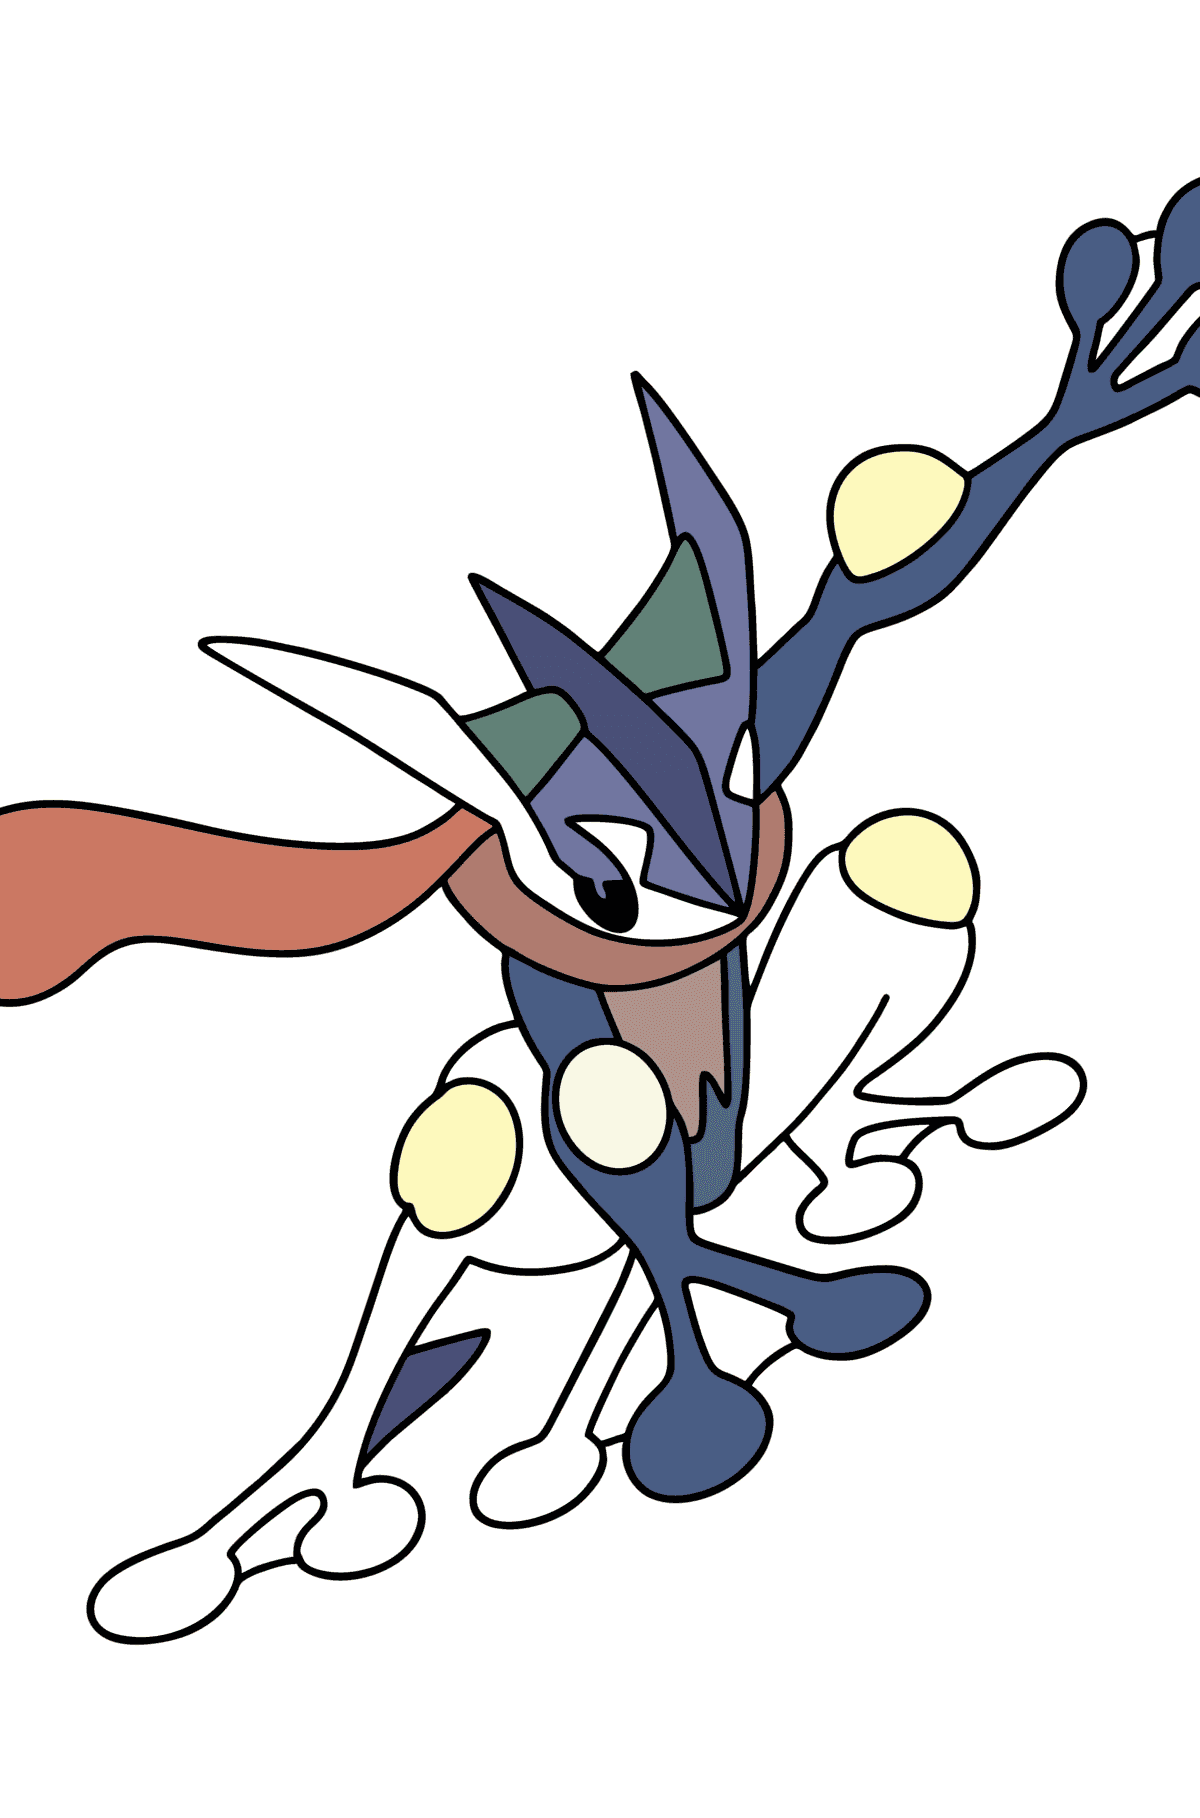 Coloring page Pokemon Go Greninja - Coloring Pages for Kids